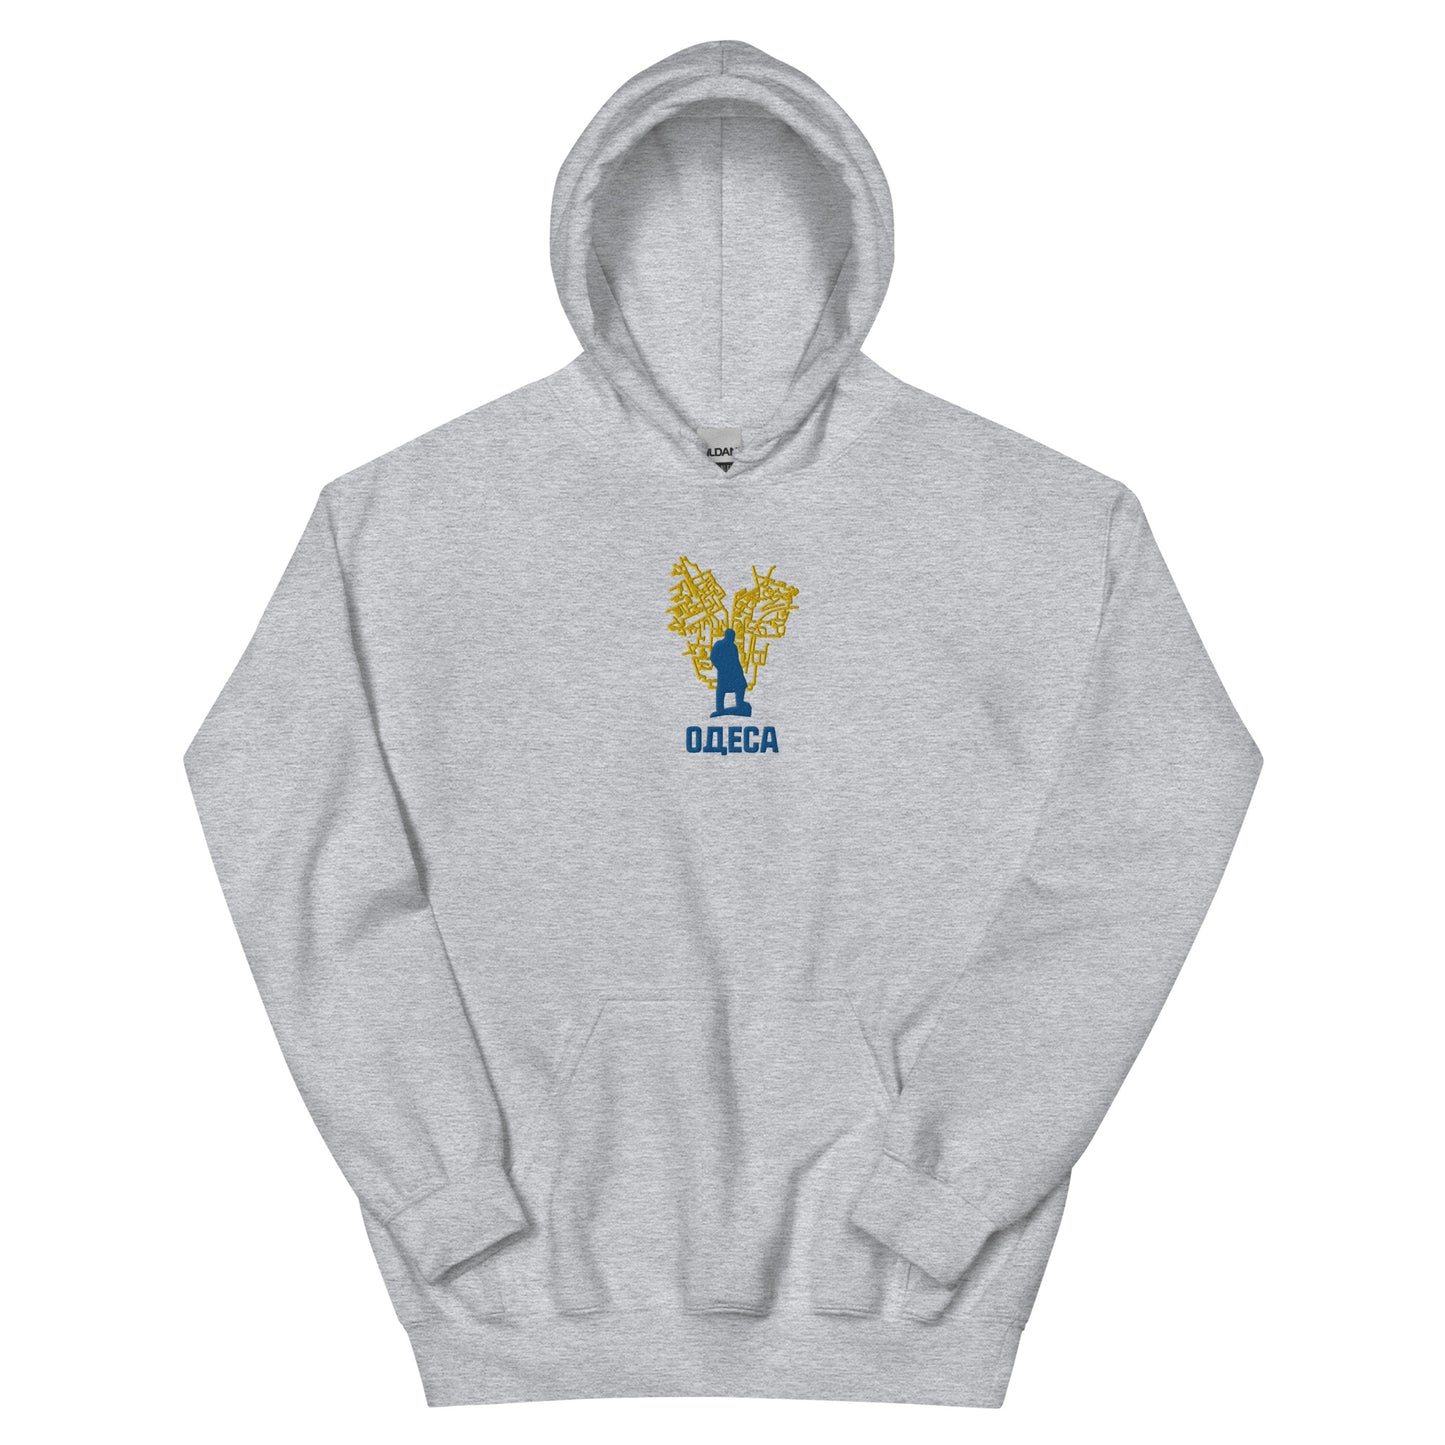 2 Years of Resistance Embroidered Hoodie Odesa (UA)